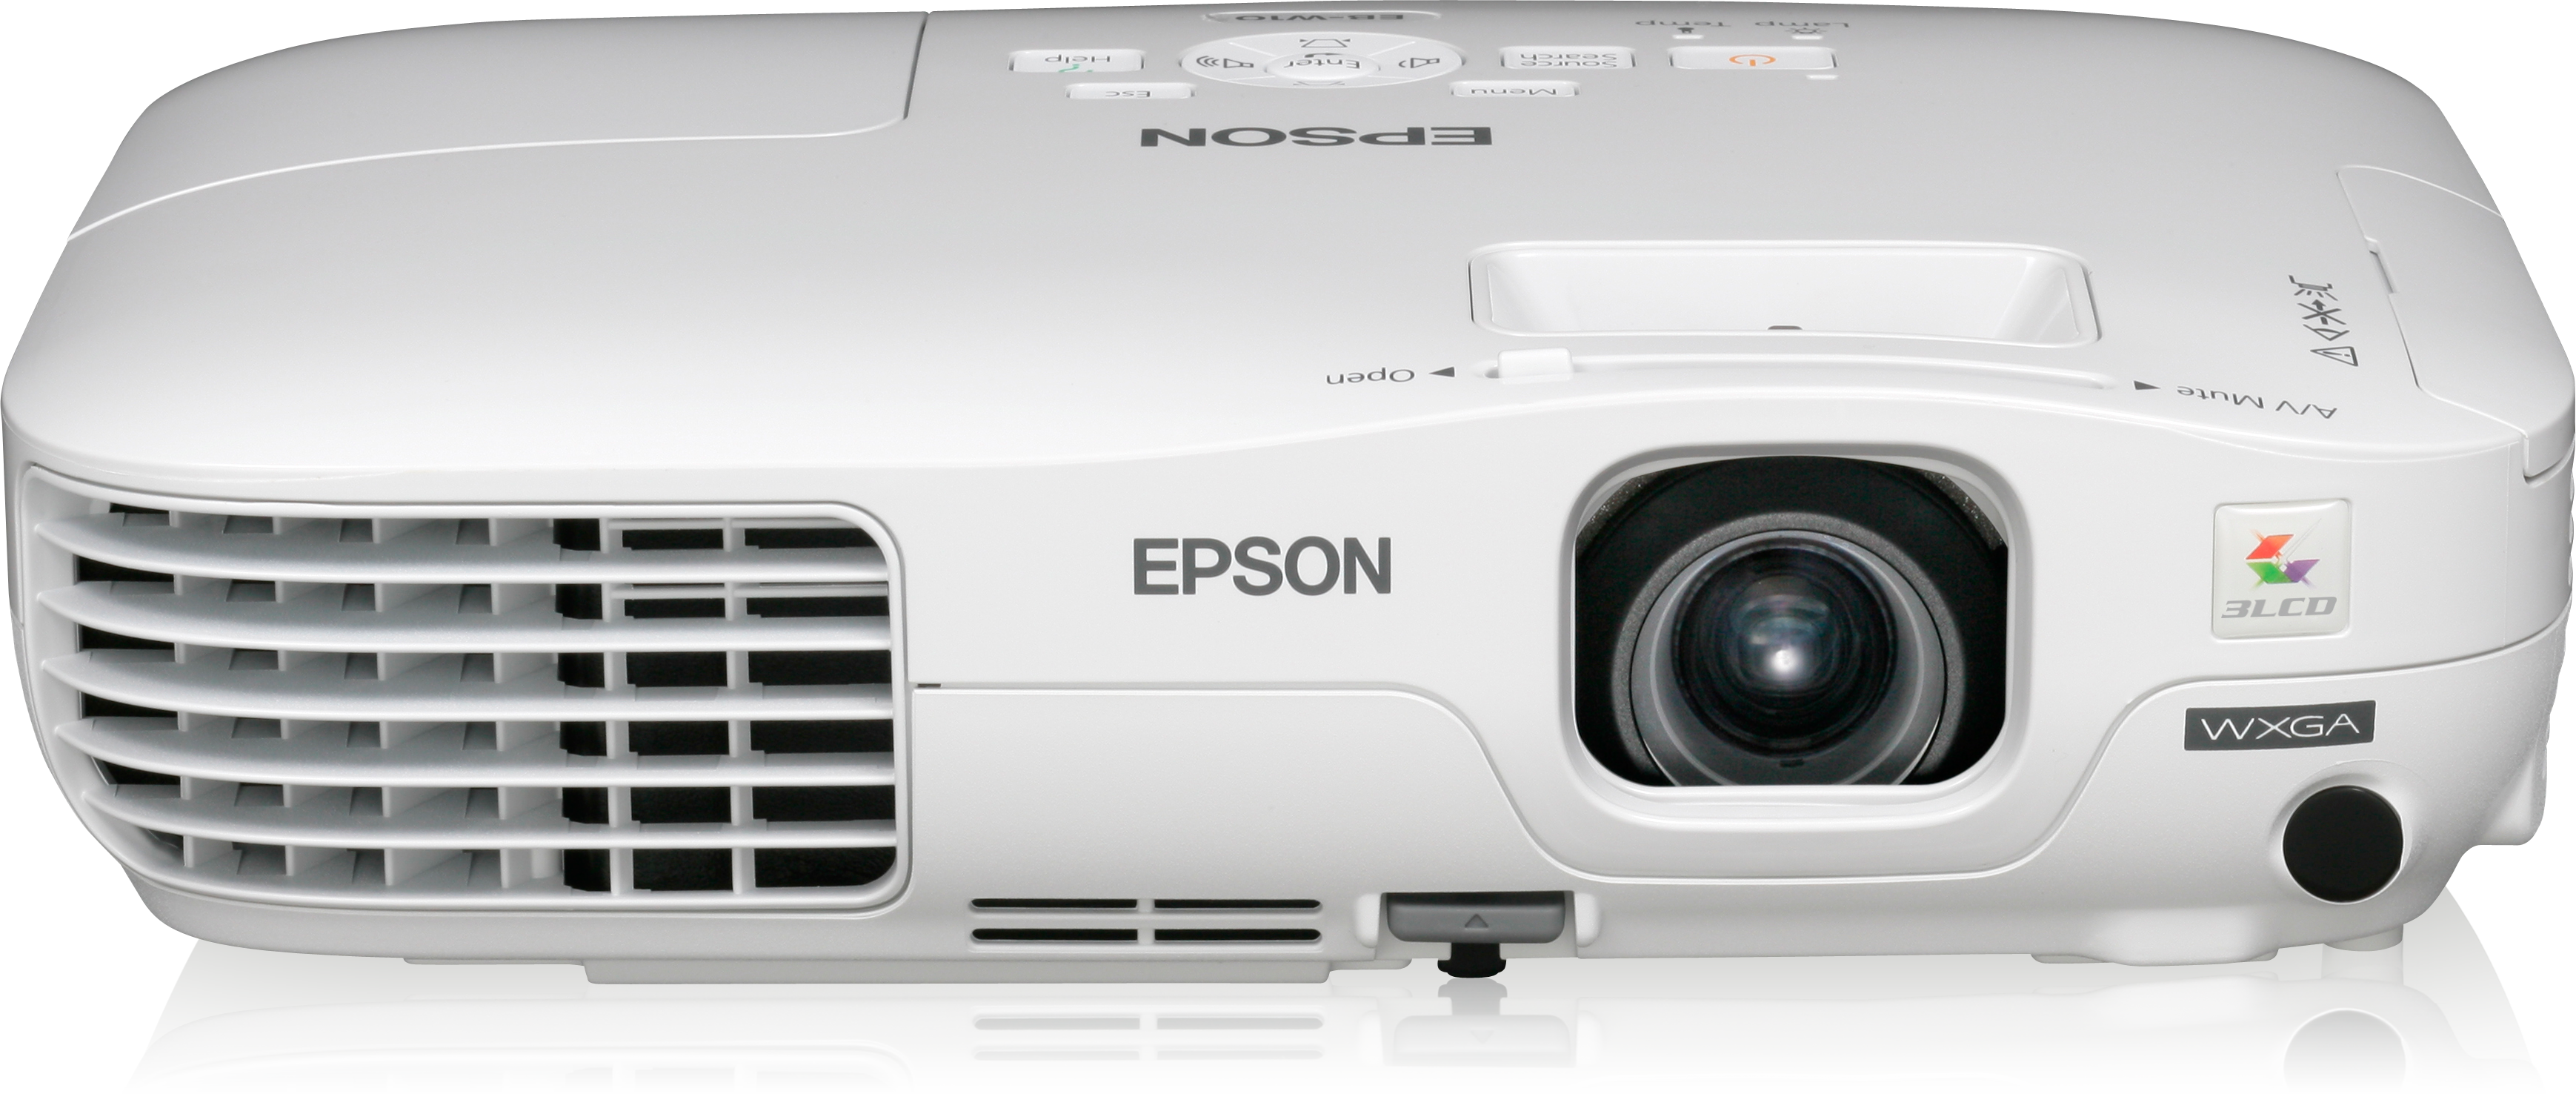 Epson EB-W10 | Mobile | Projectors | Products | Epson Europe